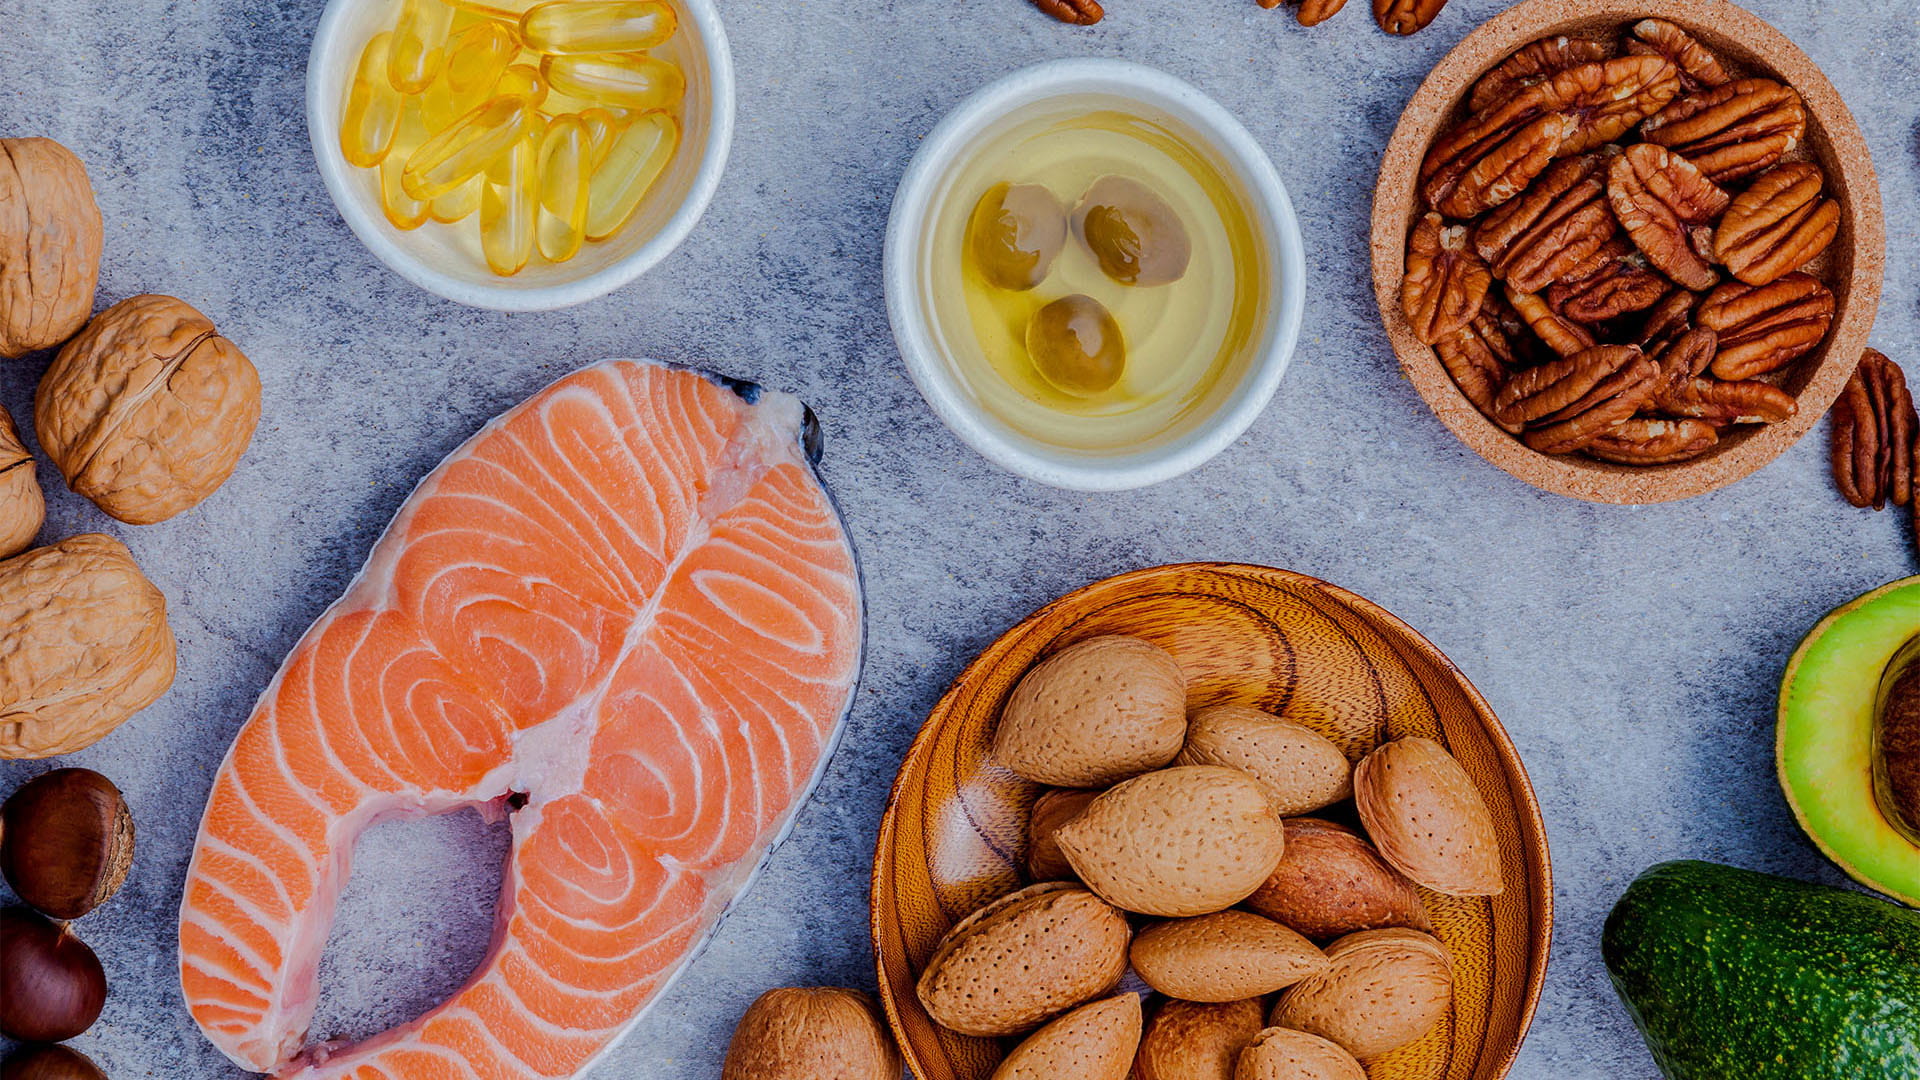 What Are the Benefits of Monounsaturated Fats?